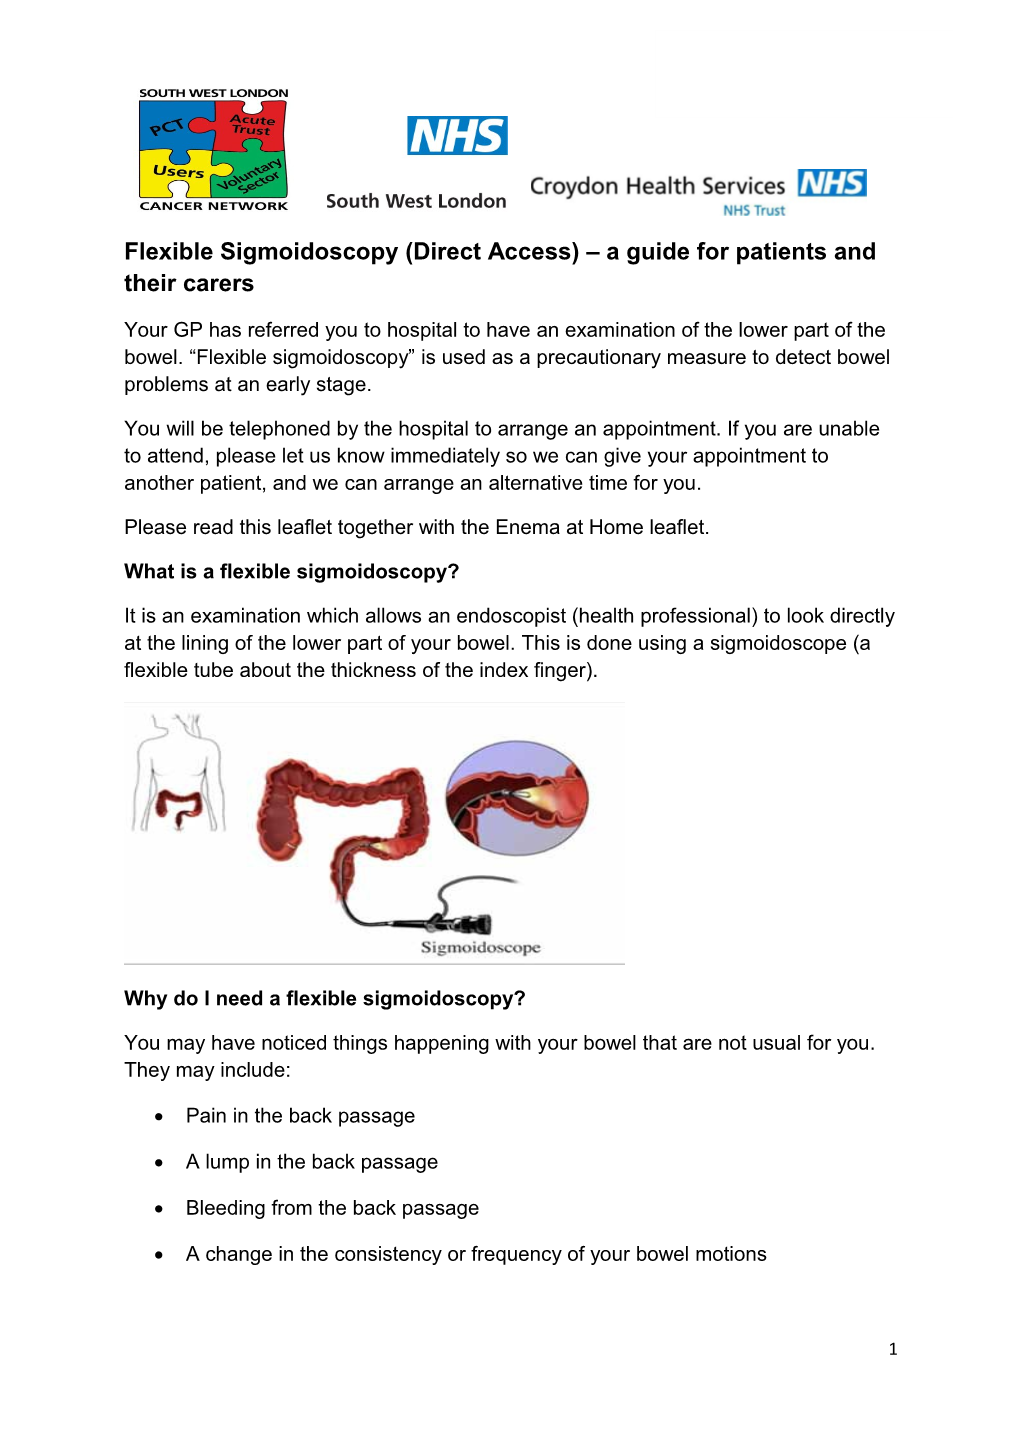 Flexible Sigmoidoscopy (Direct Access) a Guide for Patients and Their Carers